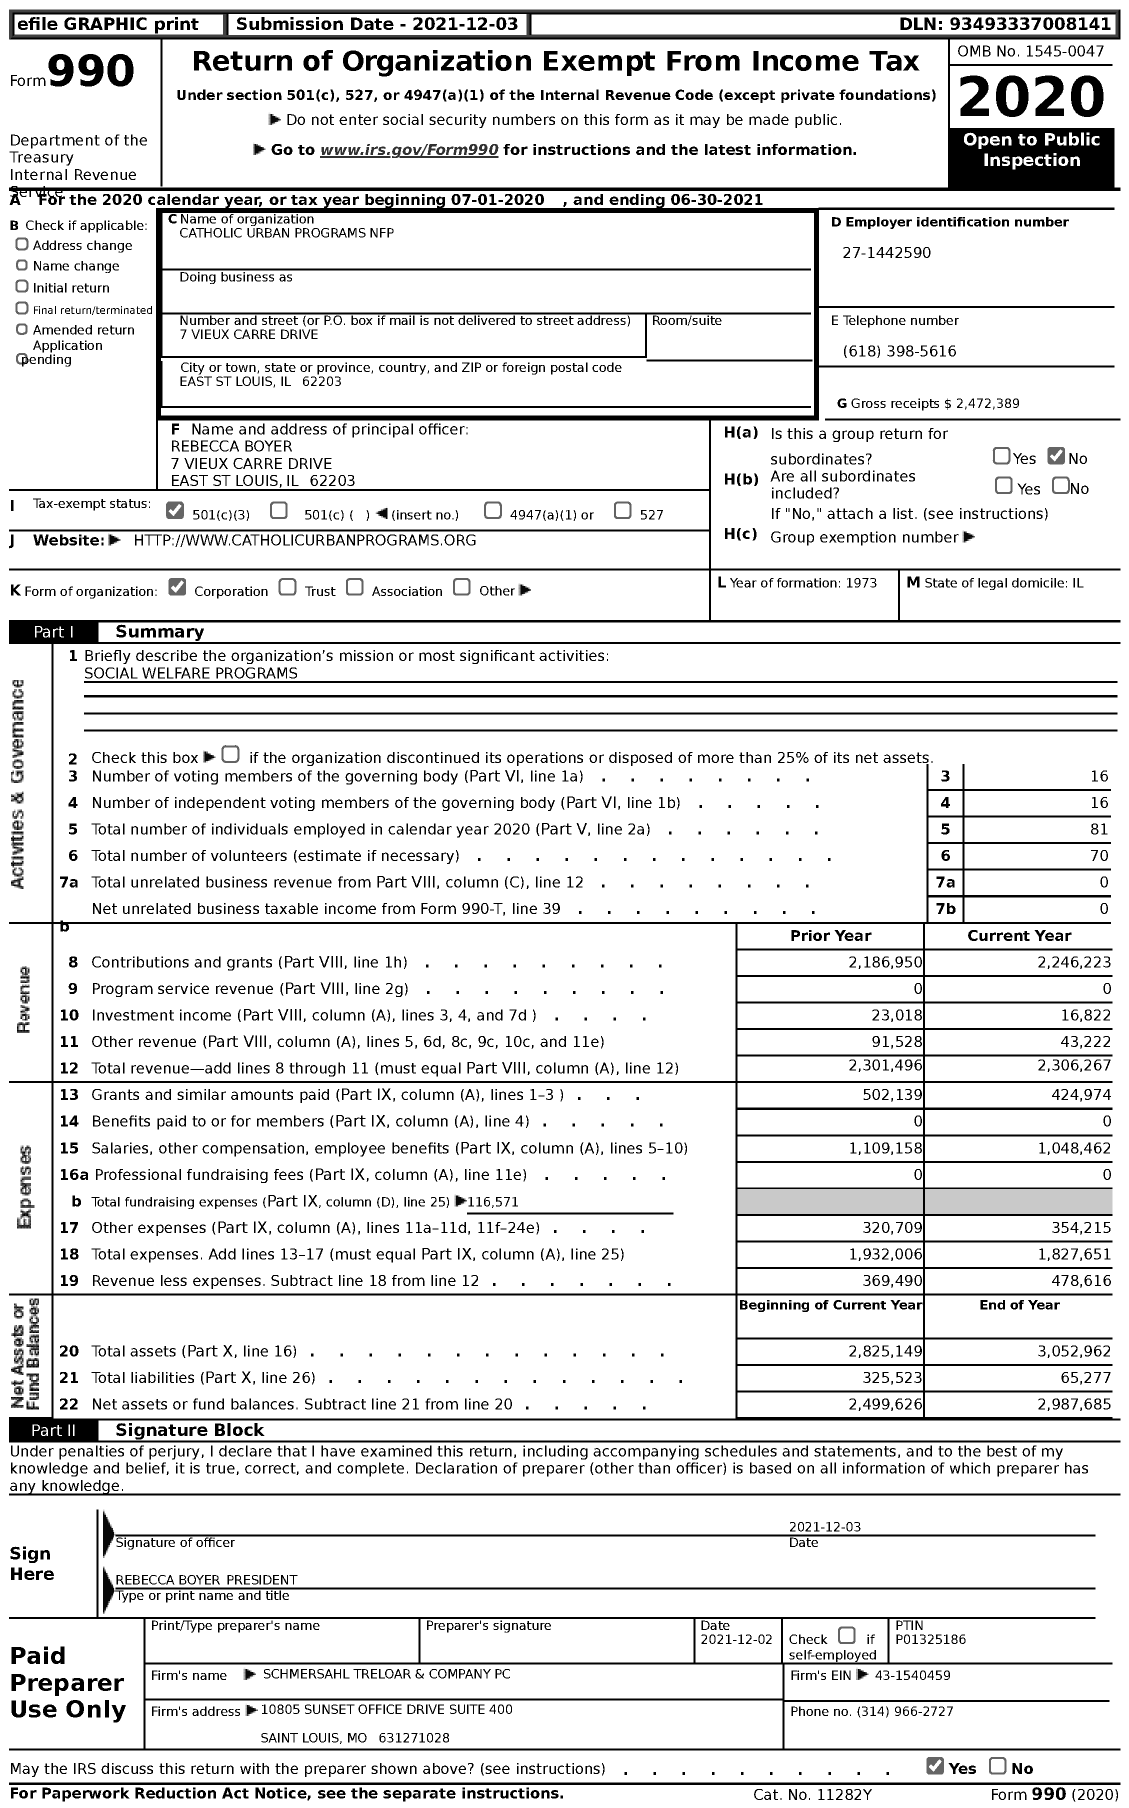 Image of first page of 2020 Form 990 for Catholic Urban Programs NFP